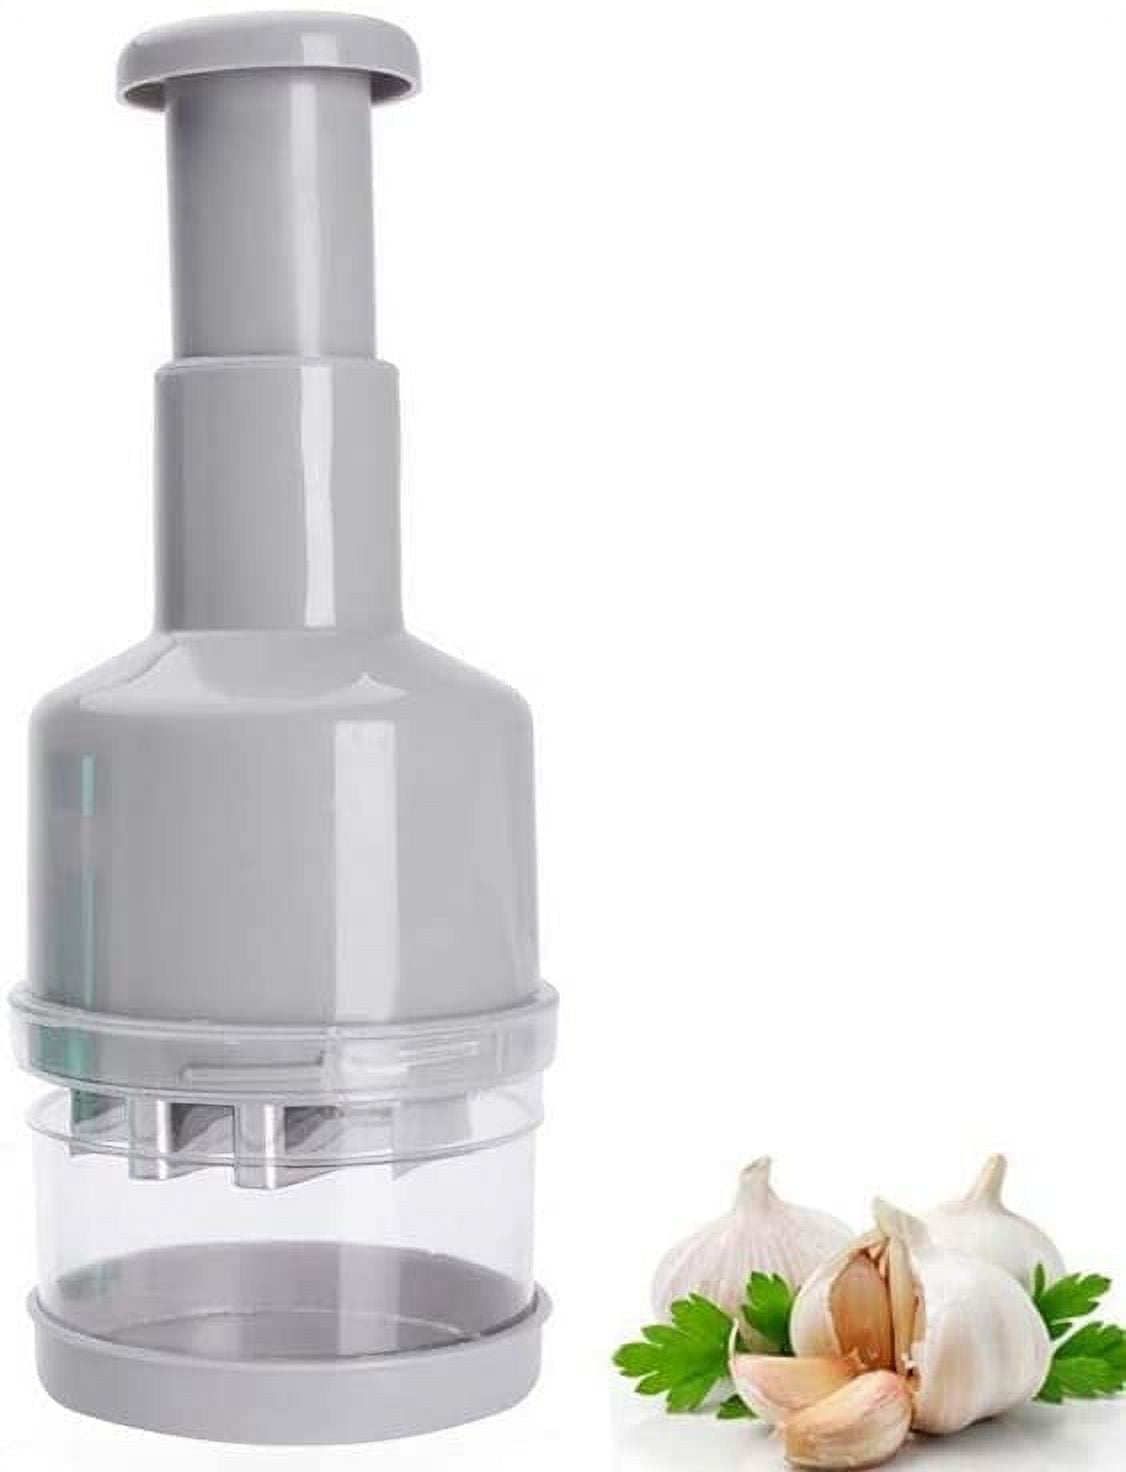 HIMAAT Hand Chopper for Vegetables, Quick Slice Manual Food Hand Dicer  Chopper, Stainless Steel Garlic Mincer Home Essentials for Onions, Garlic